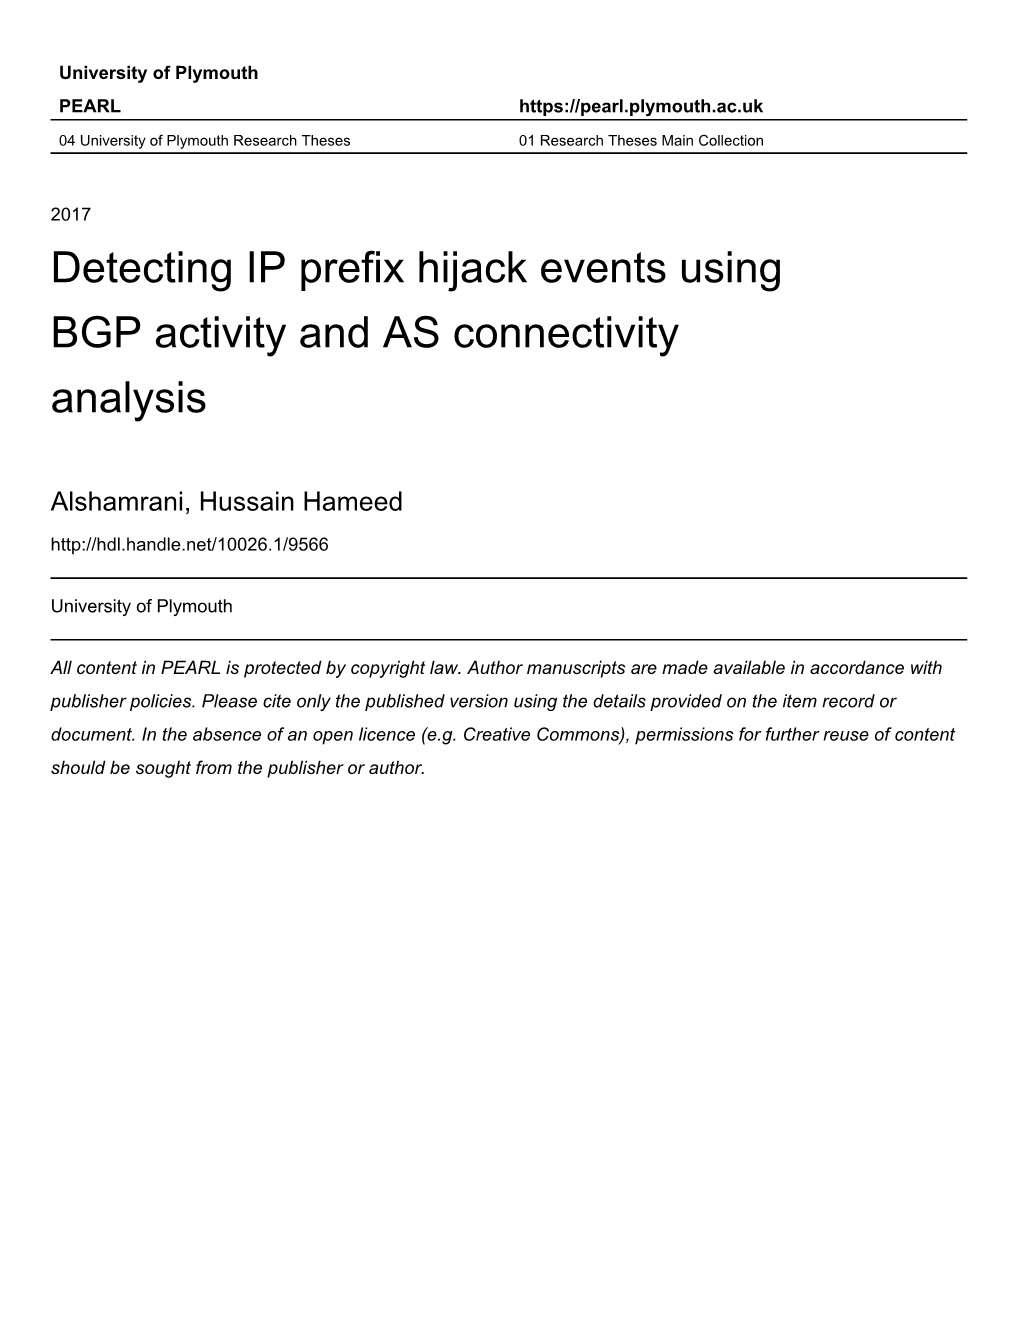 Detecting IP Prefix Hijack Events Using BGP Activity and AS Connectivity Analysis